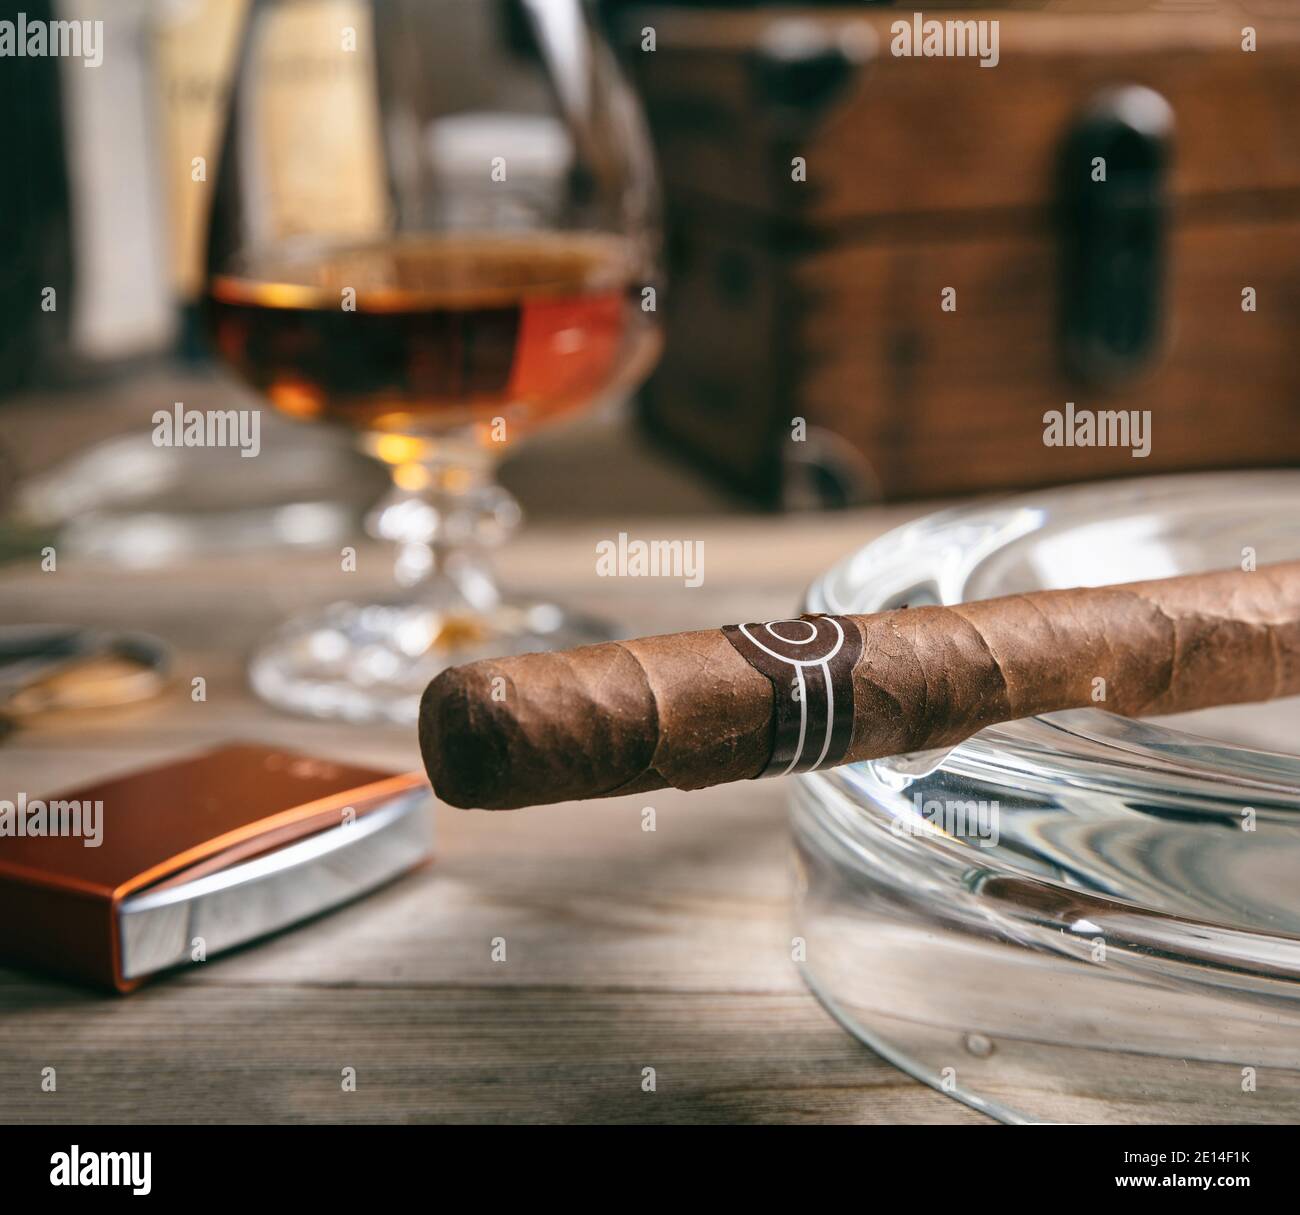 Tobacco and alcohol. Cigar and brandy on a wooden table, closeup view. Cuban quality cigar and rum, smoking and drinking luxury lifestyle Stock Photo